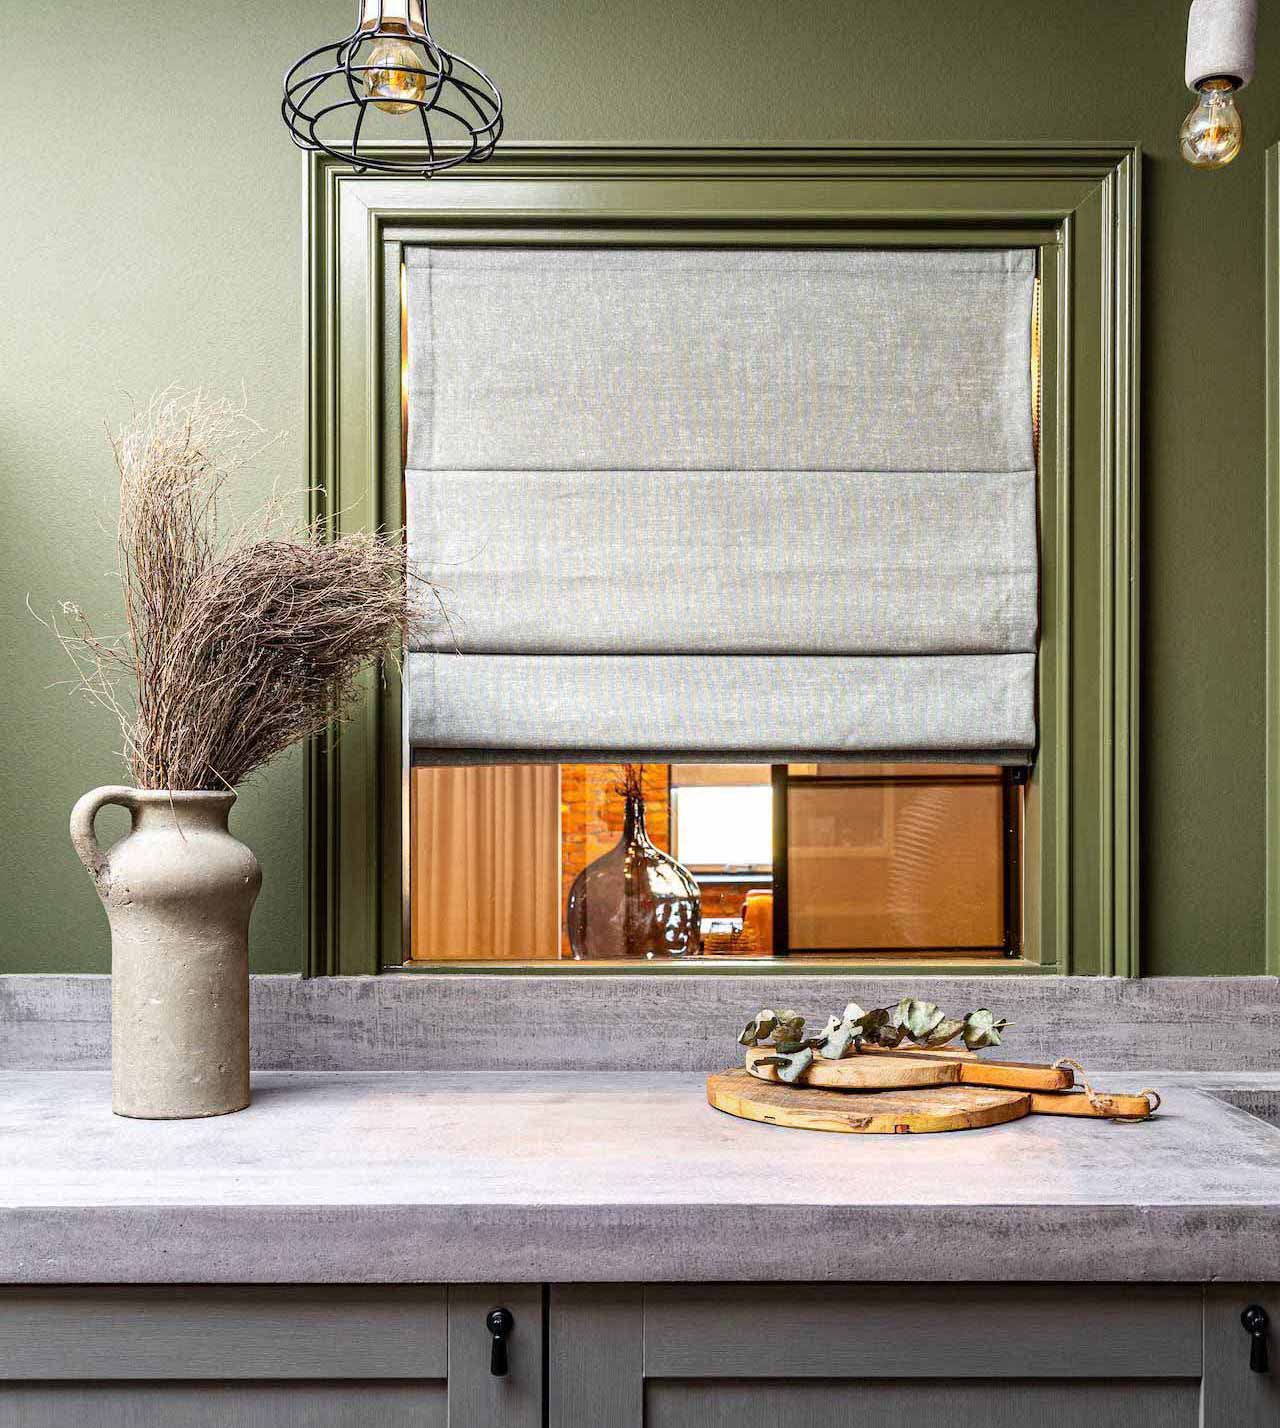 Kitchen with window and rough concrete rustic countertop